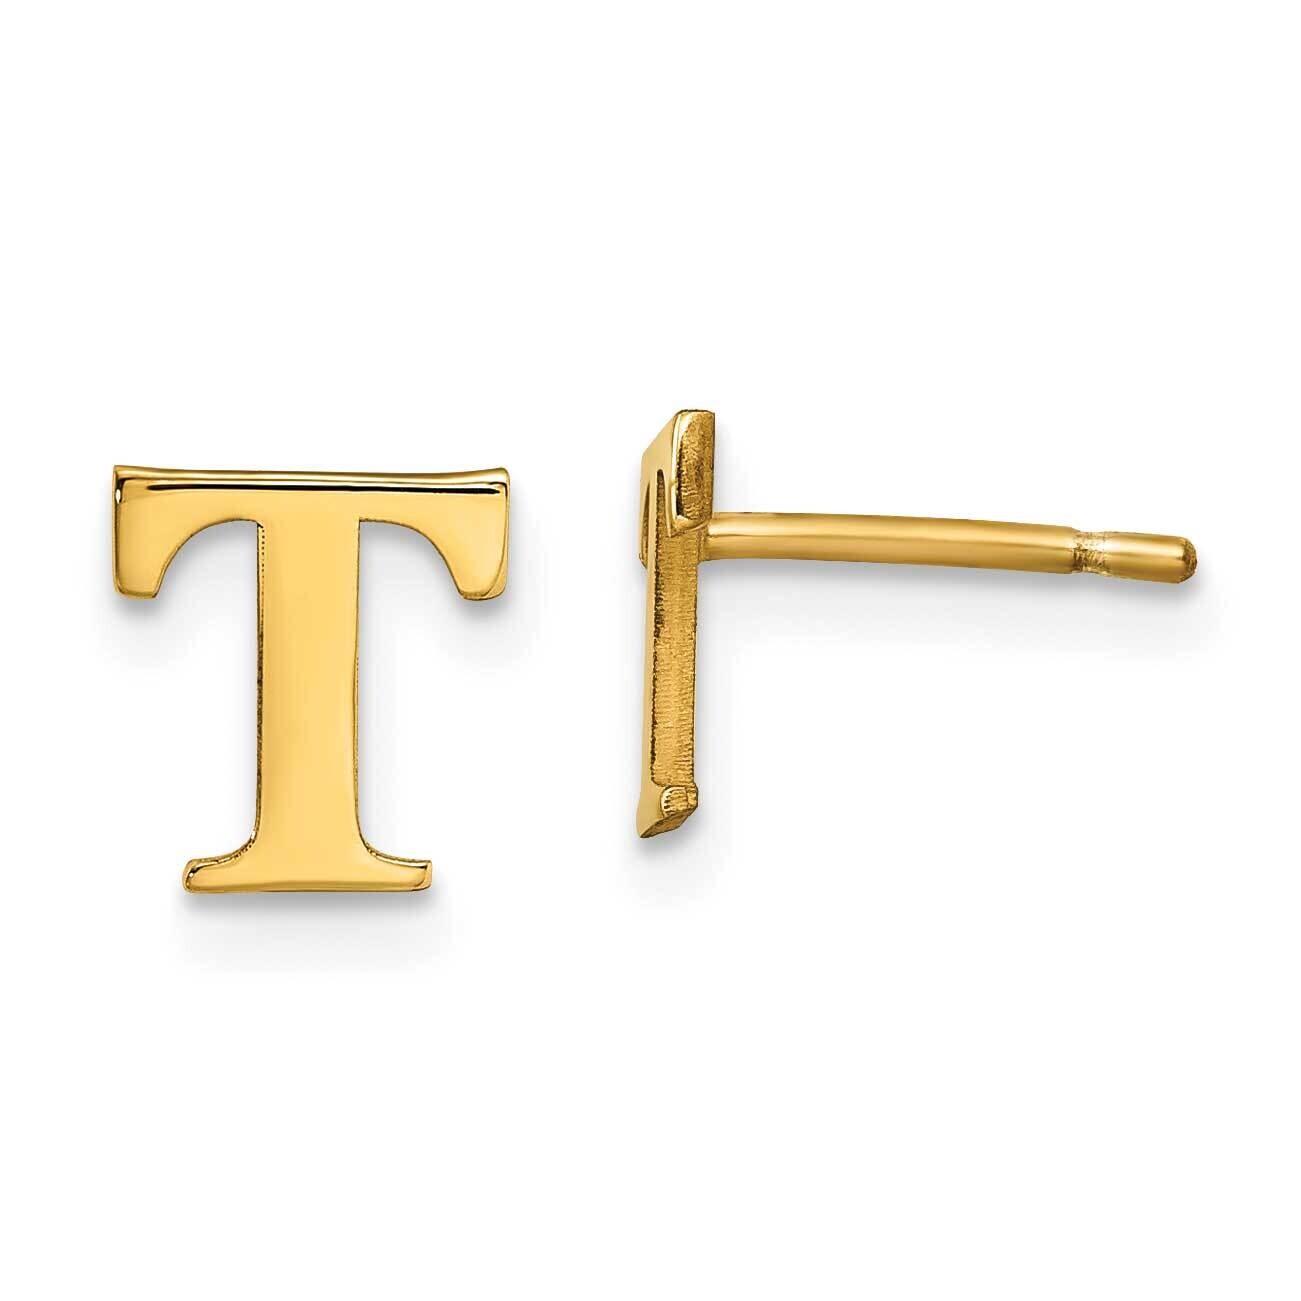 Gold-Plated Letter T Initial Post Earrings Sterling Silver XNE46GP/T